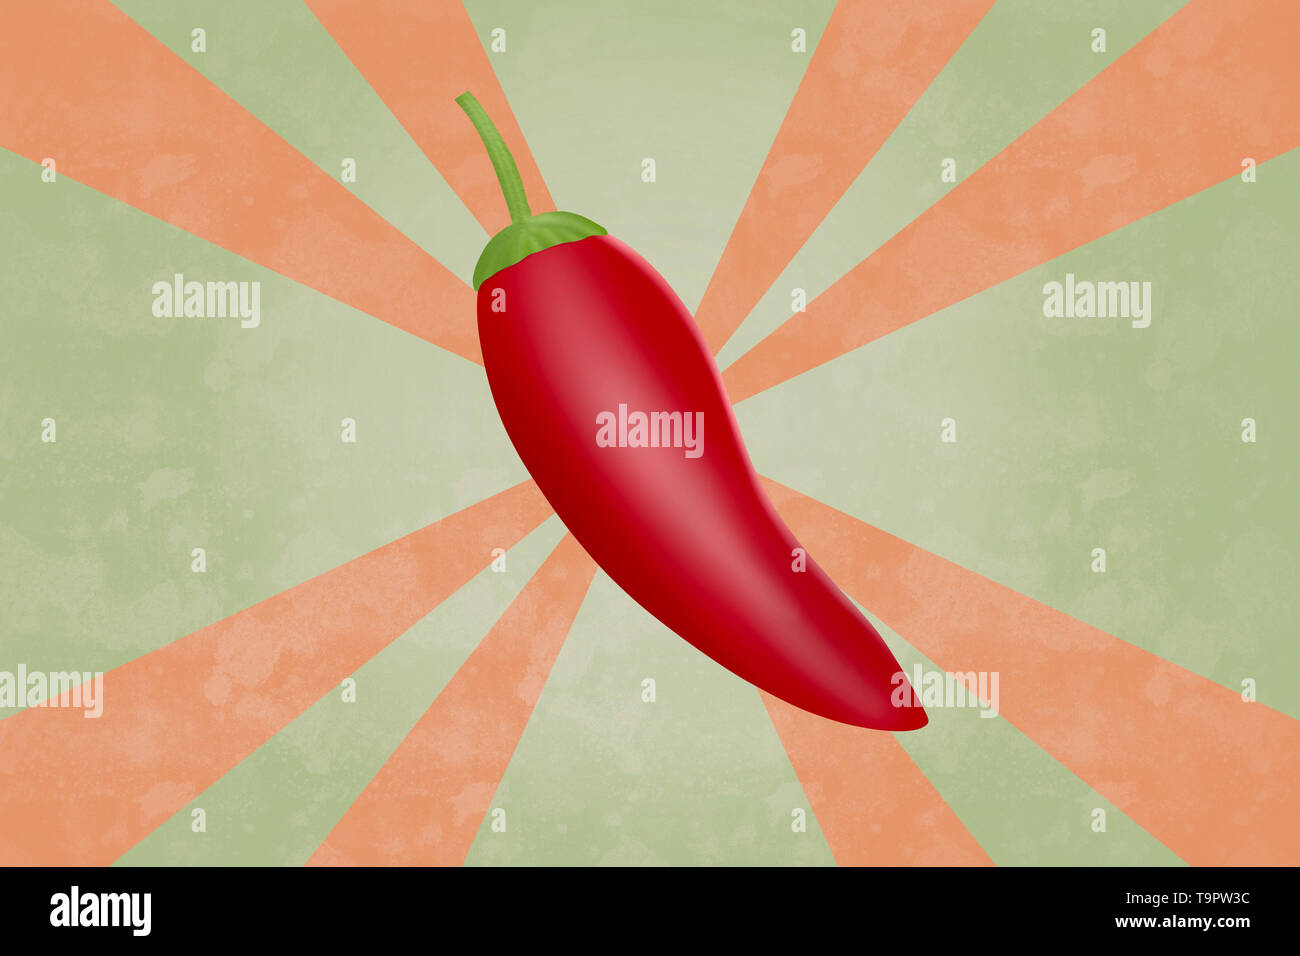 Realistic Red hot  chili pepper on retro style background Stock Photo